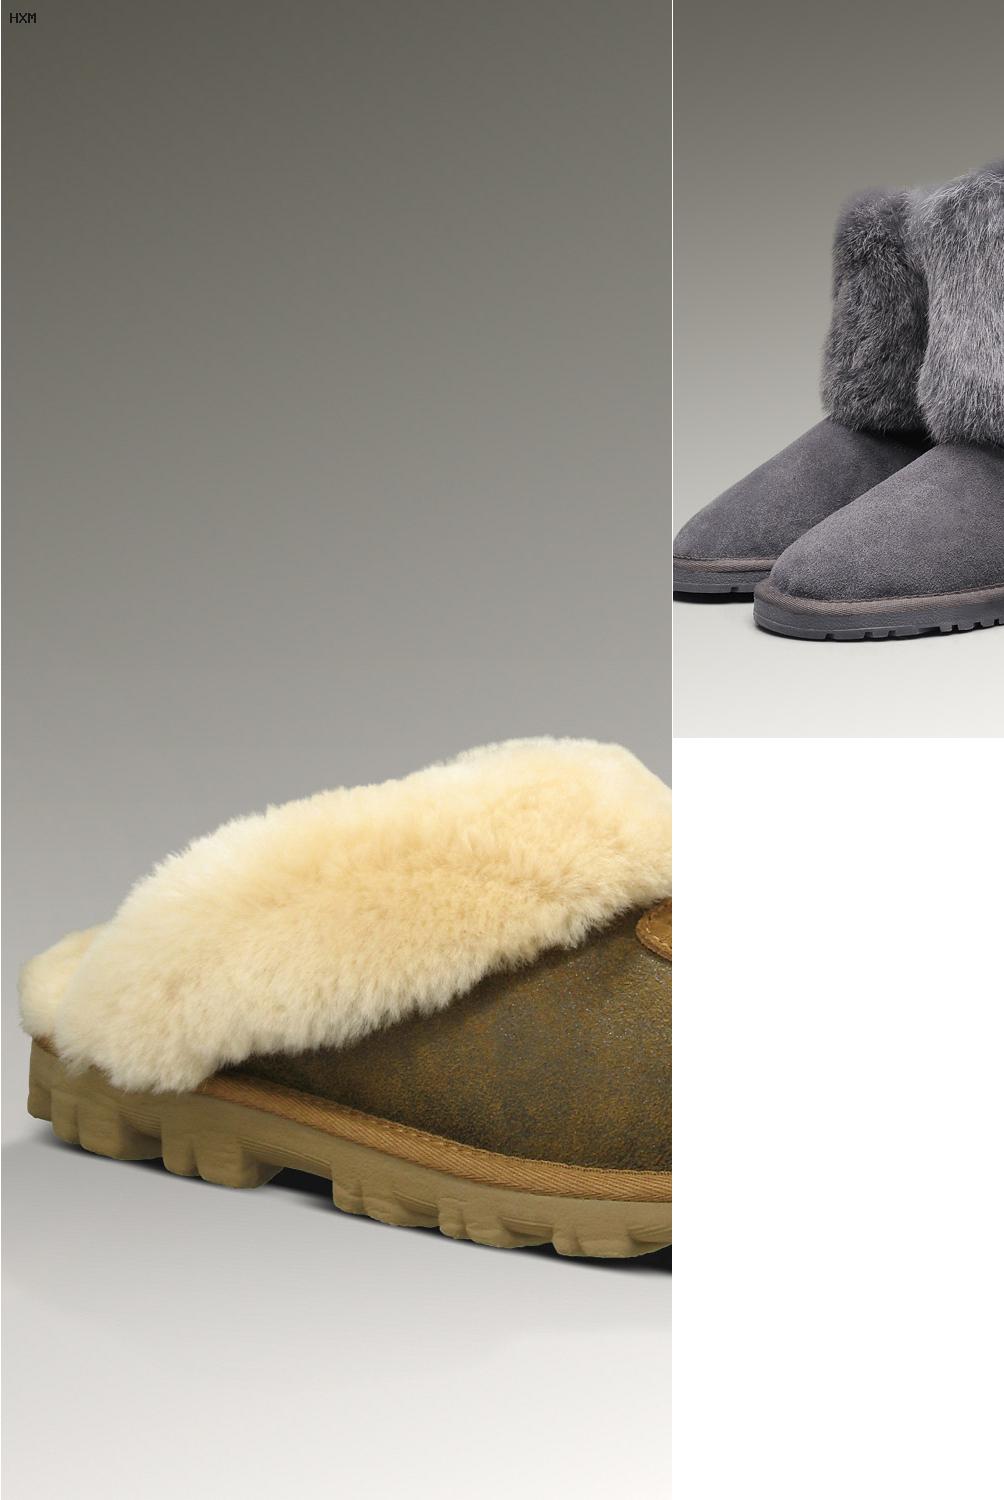 cheap ugg boots clearance sale